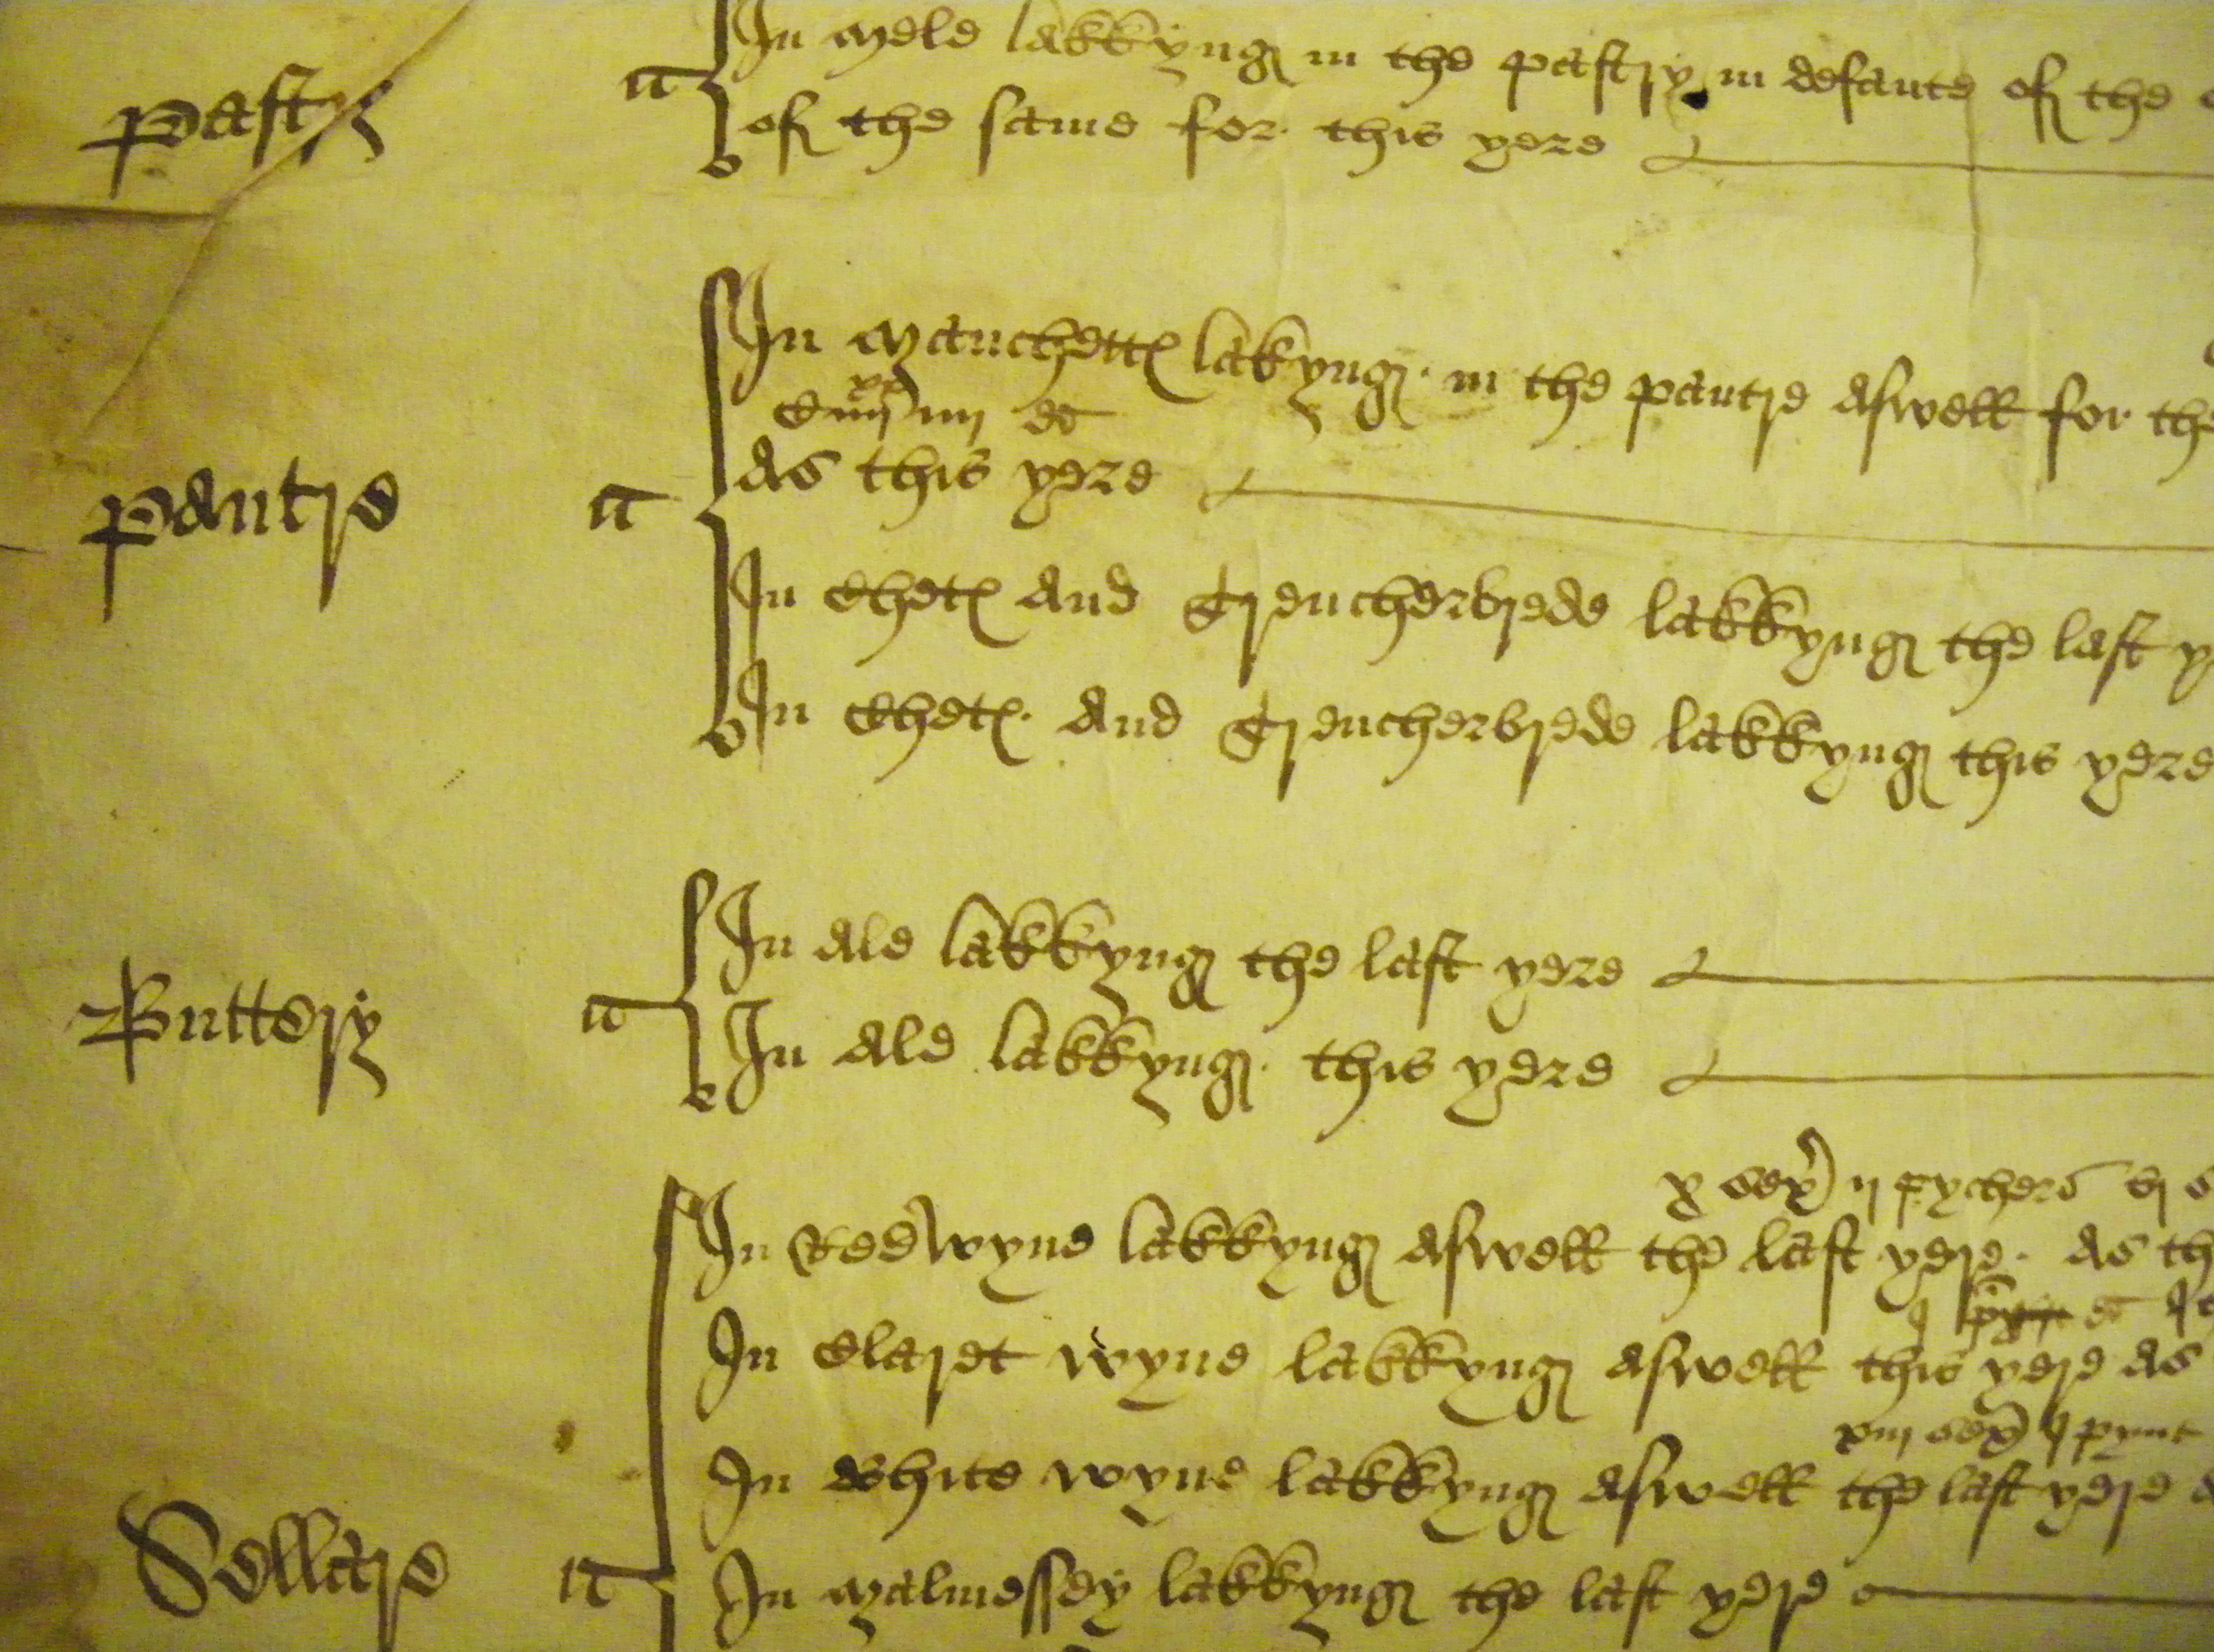 Lady Margaret’s accounts, 1508. An old handwritten document on parchment.